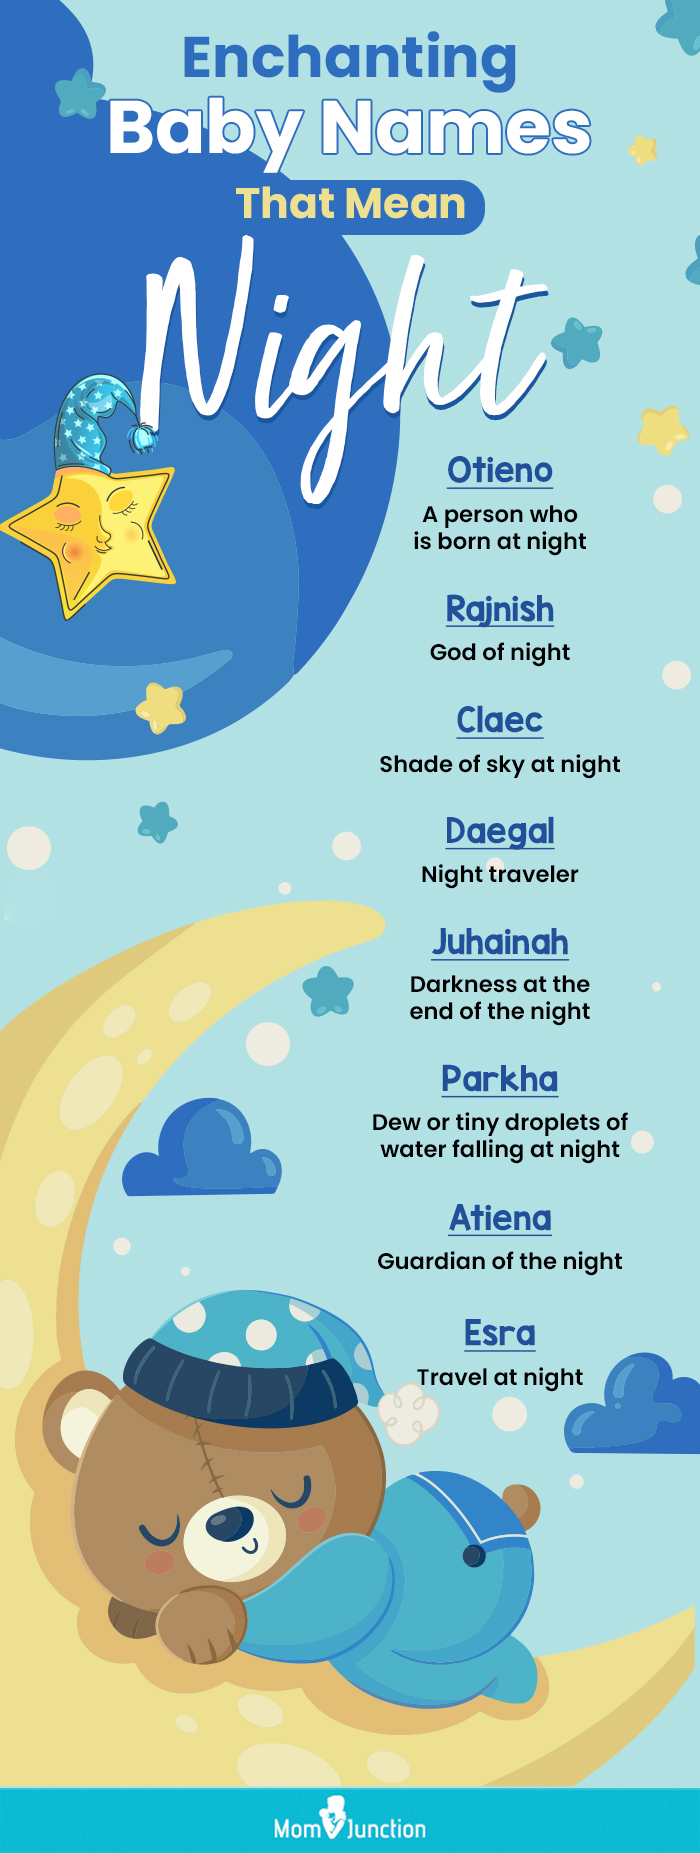 Enchanting Baby Names That Mean Night (infographic)